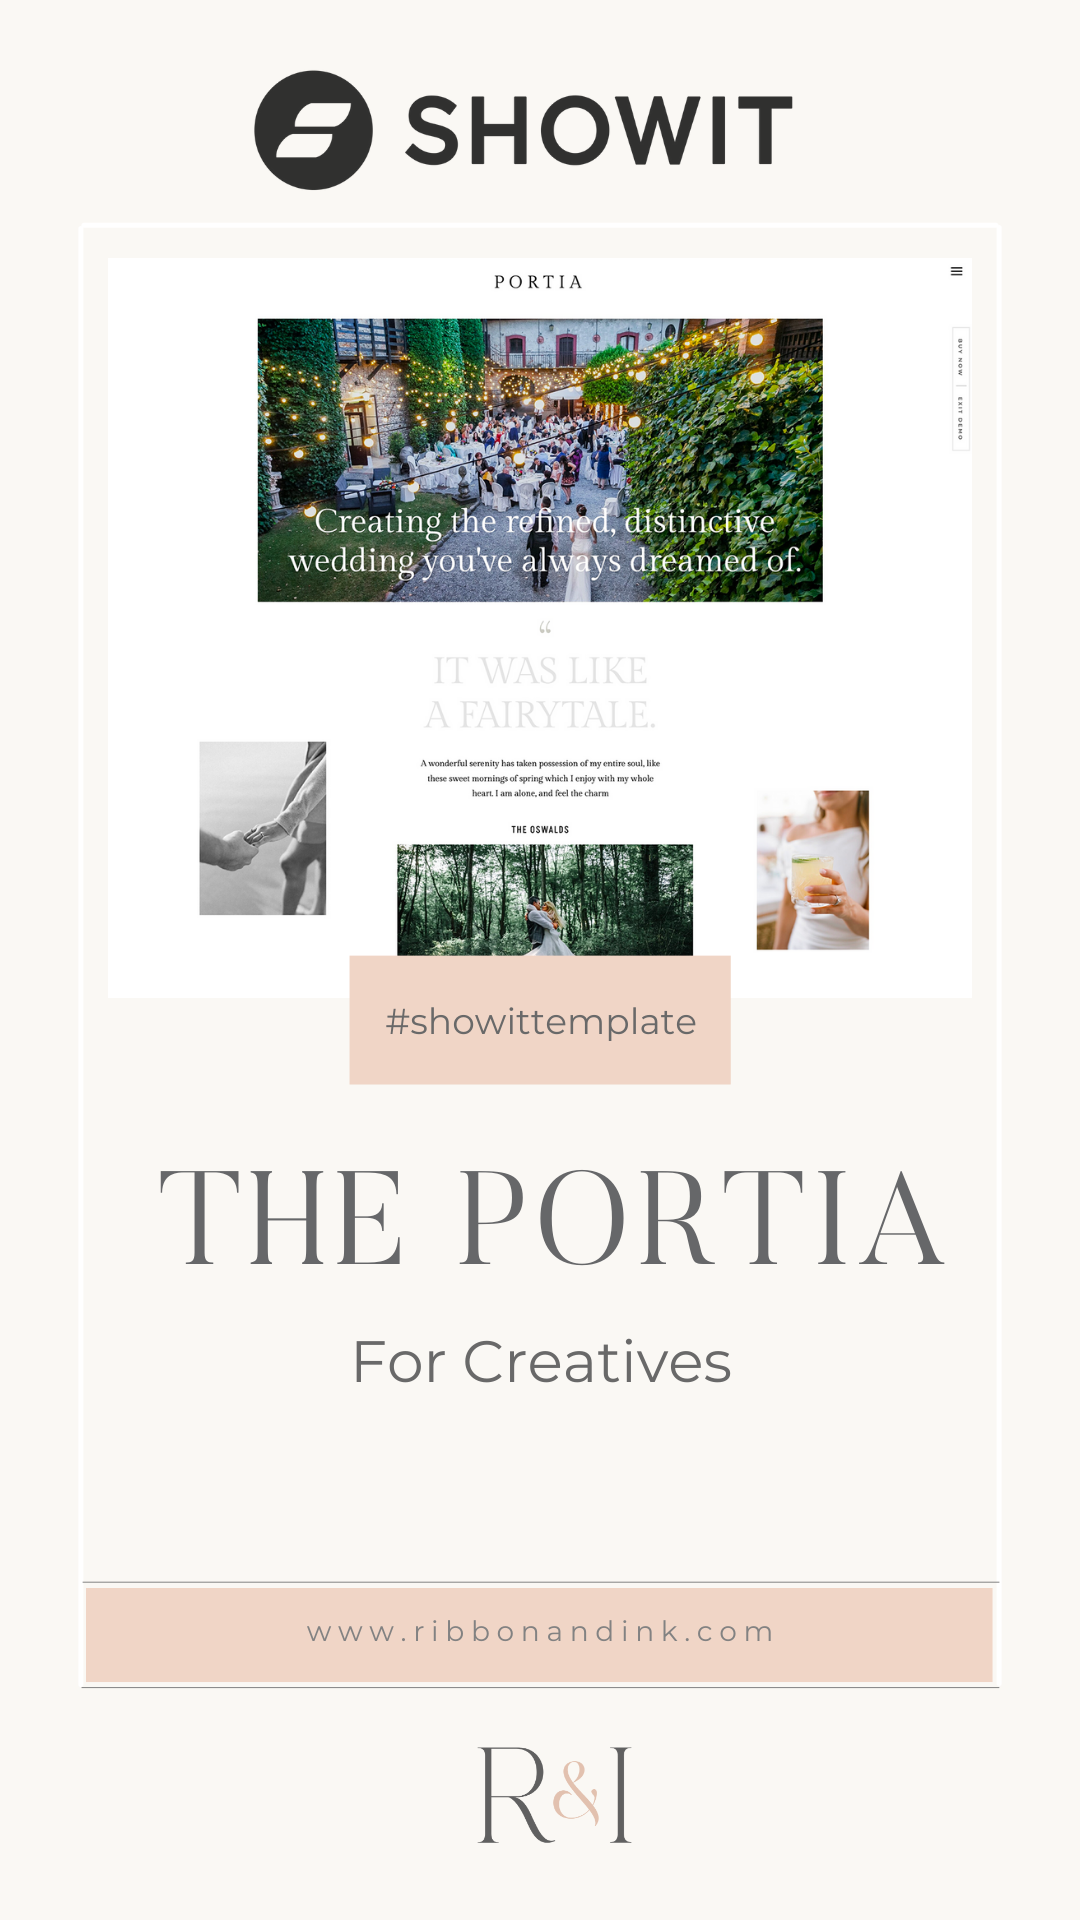 modern editorial showit website template for creatives and wedding businesses